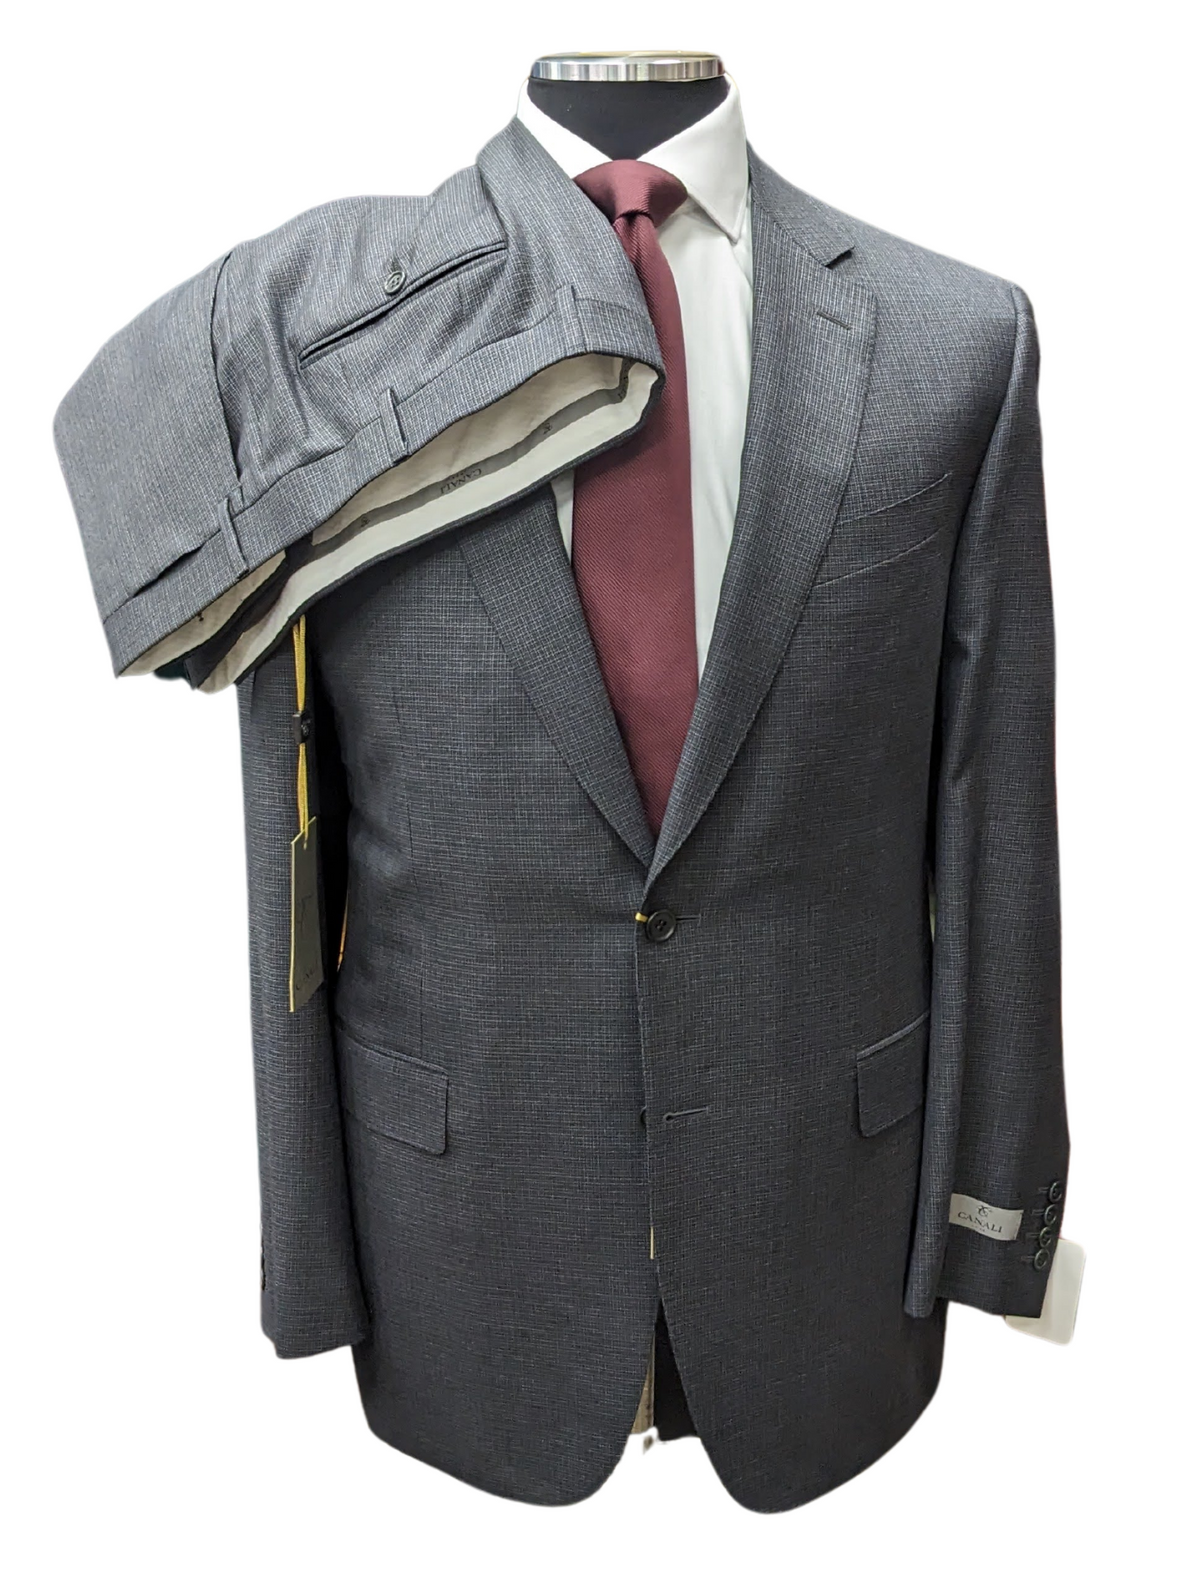 Canali 1934 Mens Gray Check 44R Drop 8 100% Wool 2 Button 2 Piece Suit